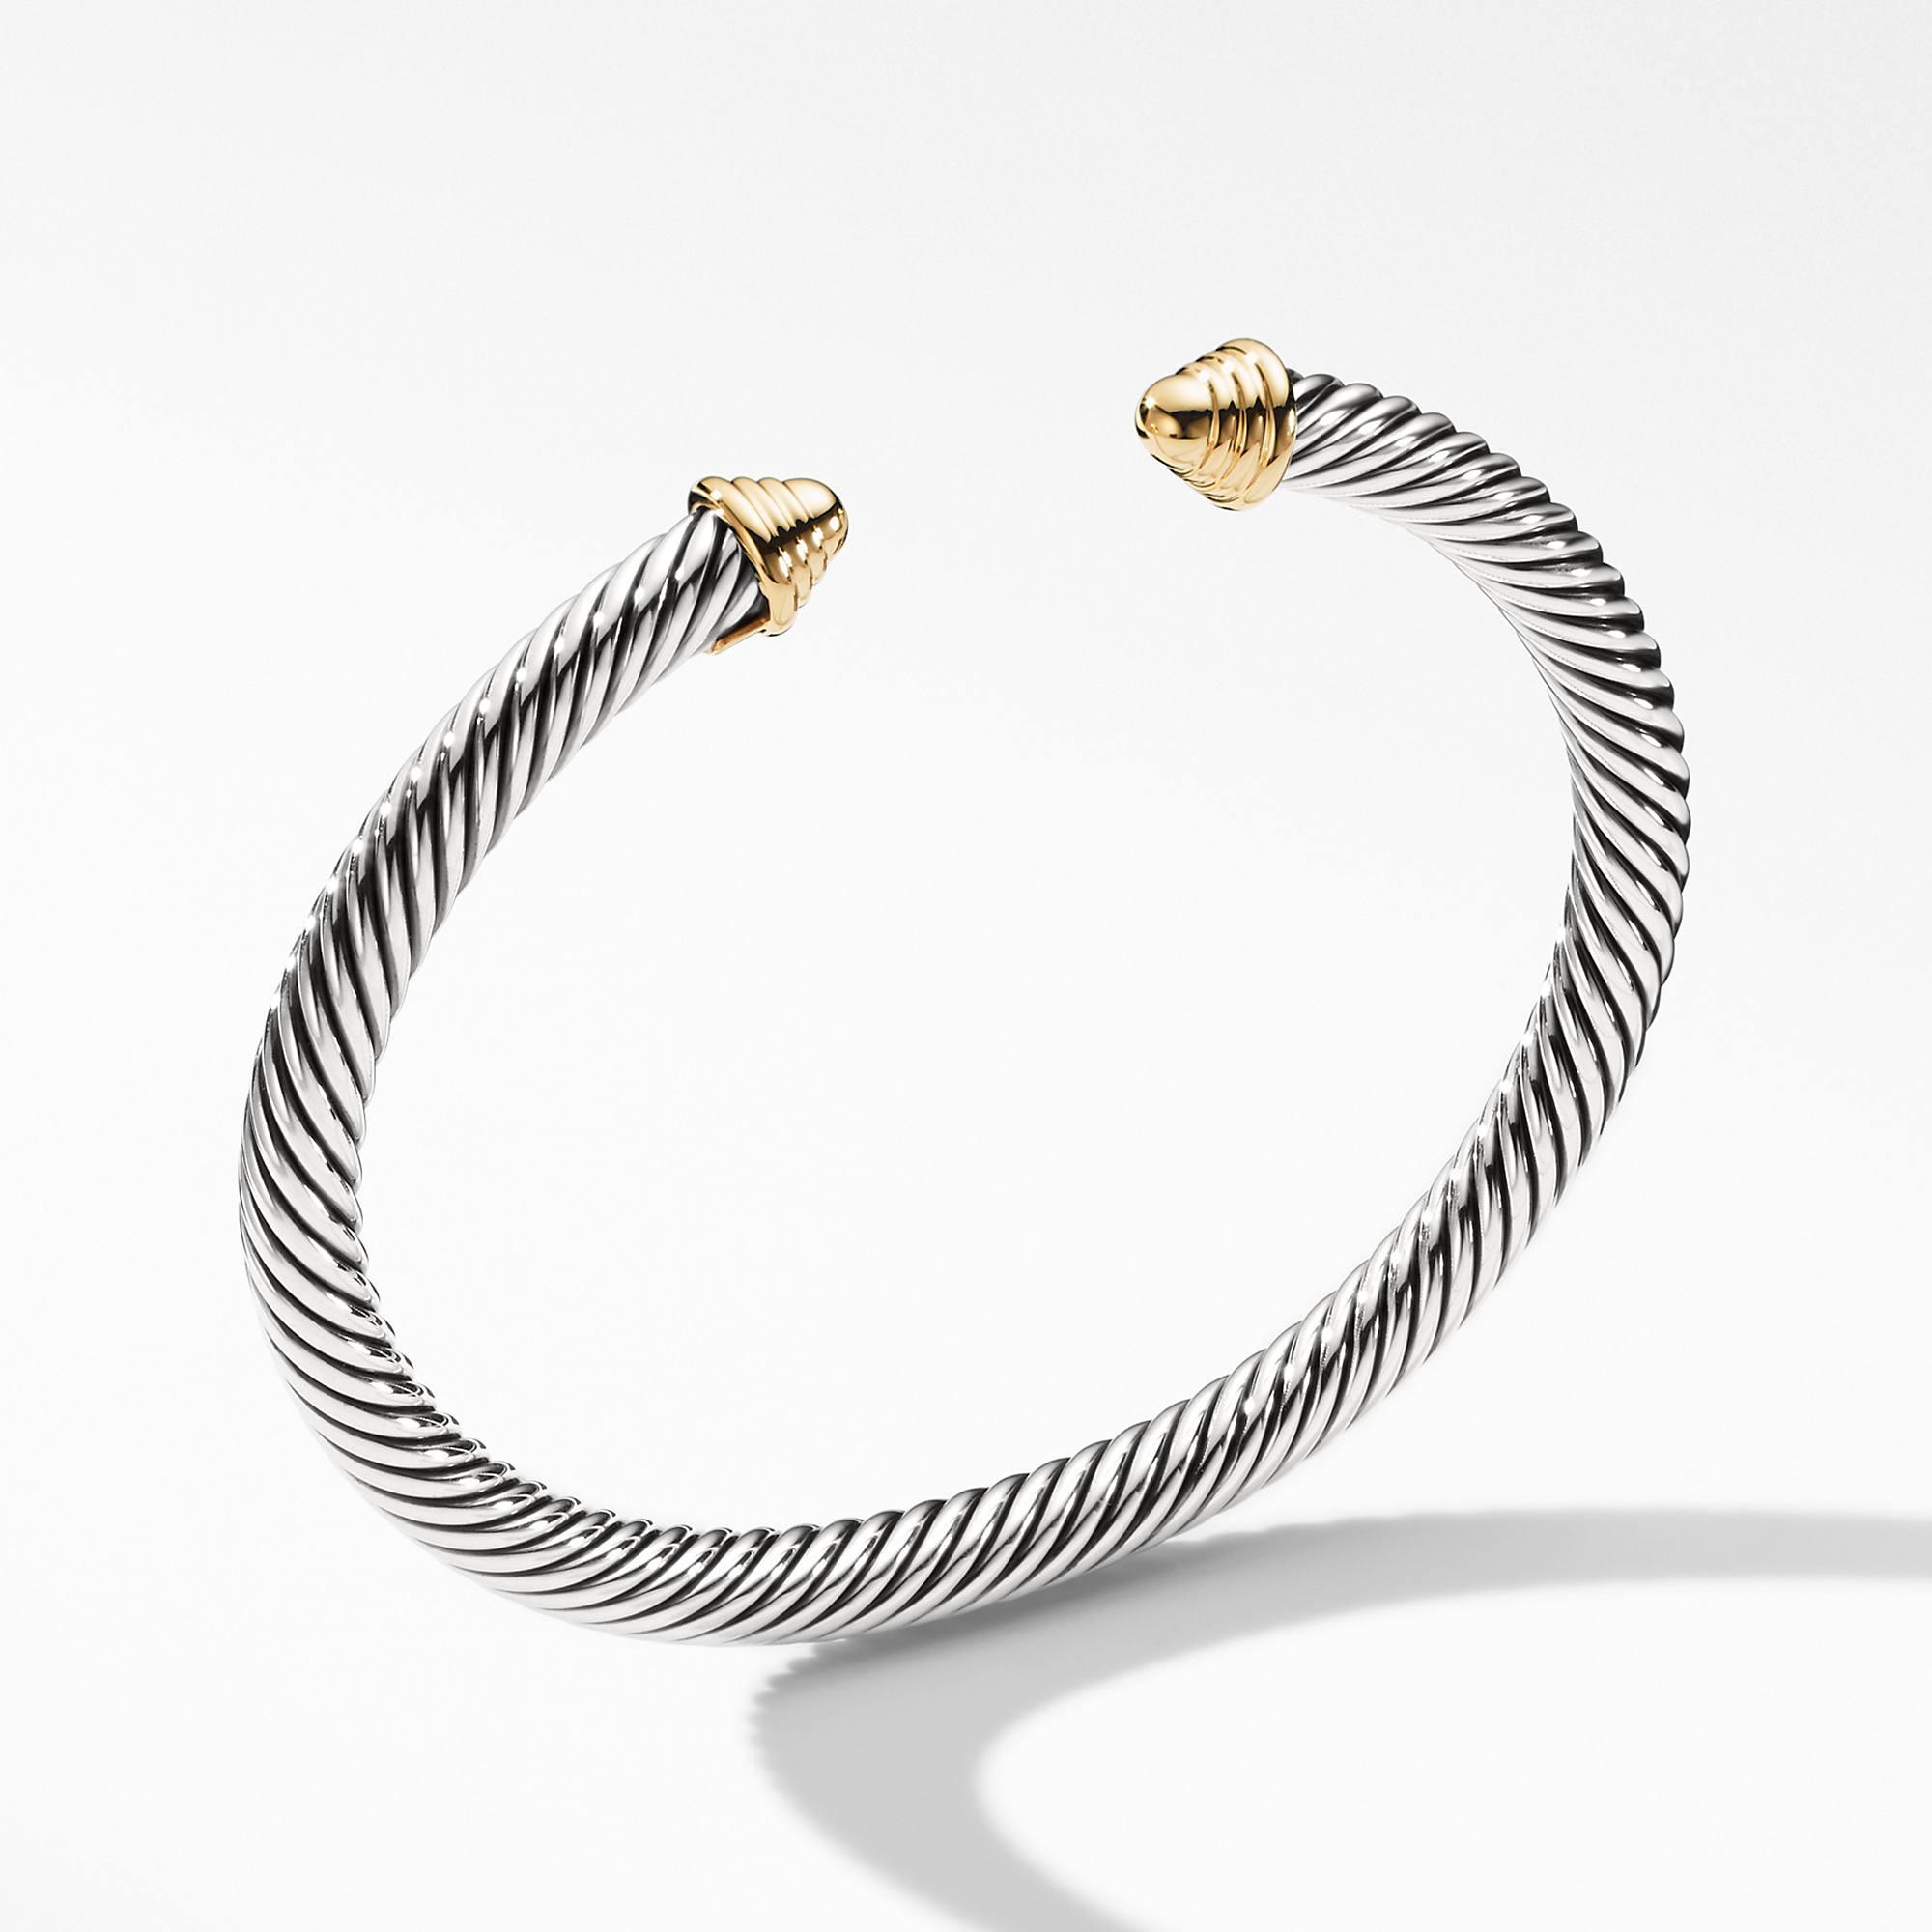 David Yurman 5 mm Gold Dome Thoroughbred Bracelet in Sterling Silver and 14K Yellow Gold